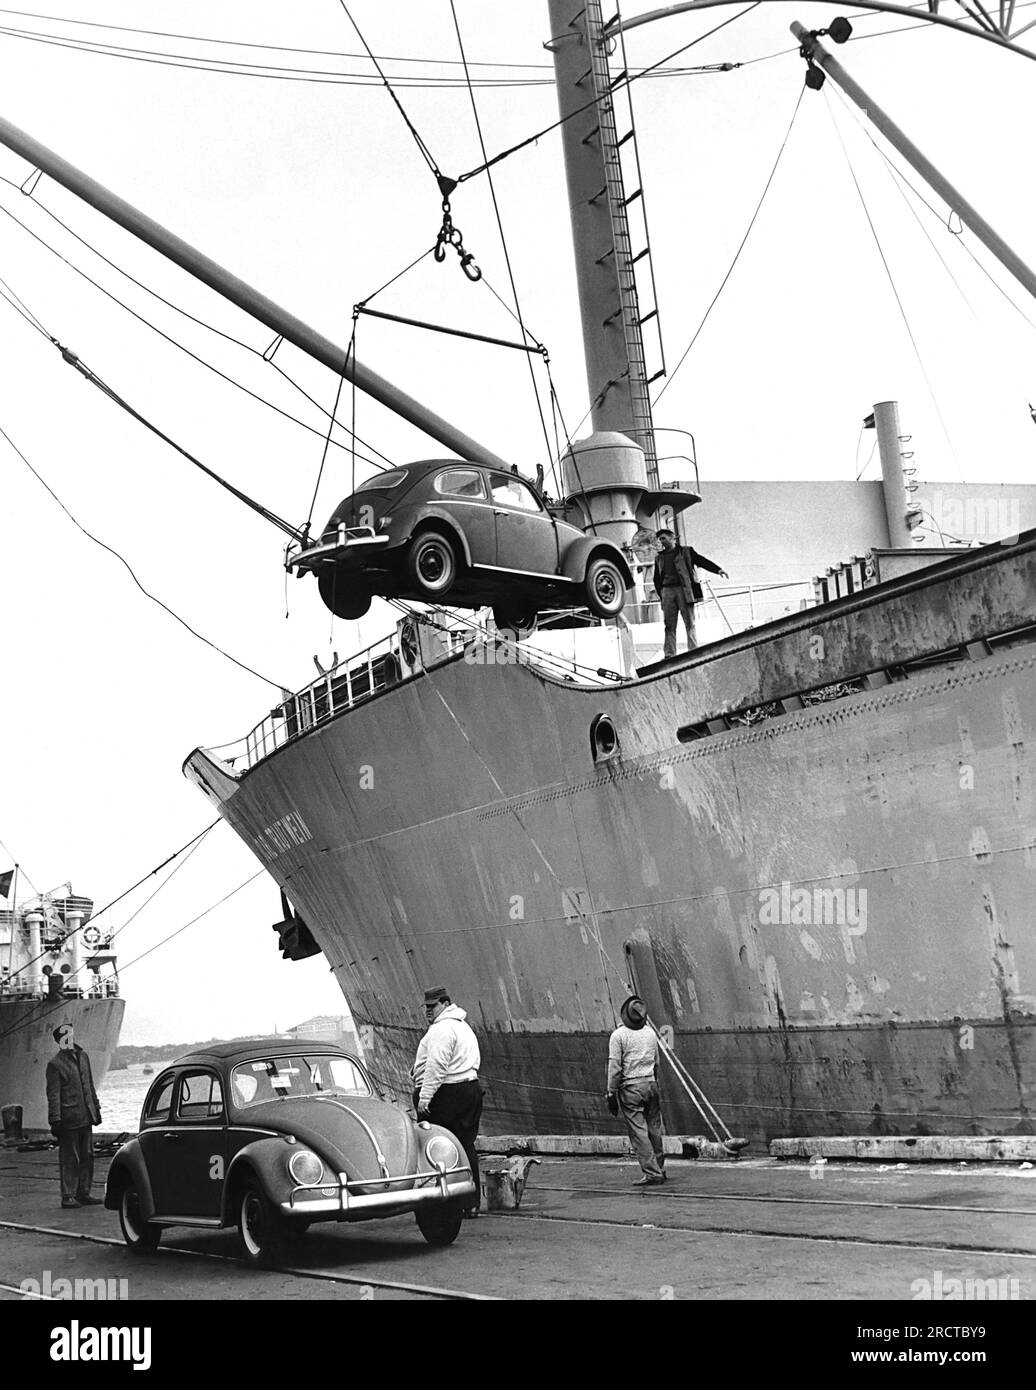 United States:  c. 1962 The auto carrier ship M.S. Carl Trautwein unloads its cargo of 1250 Volkswagons. A shipload like this arrives somewhere in the United States every day. Stock Photo